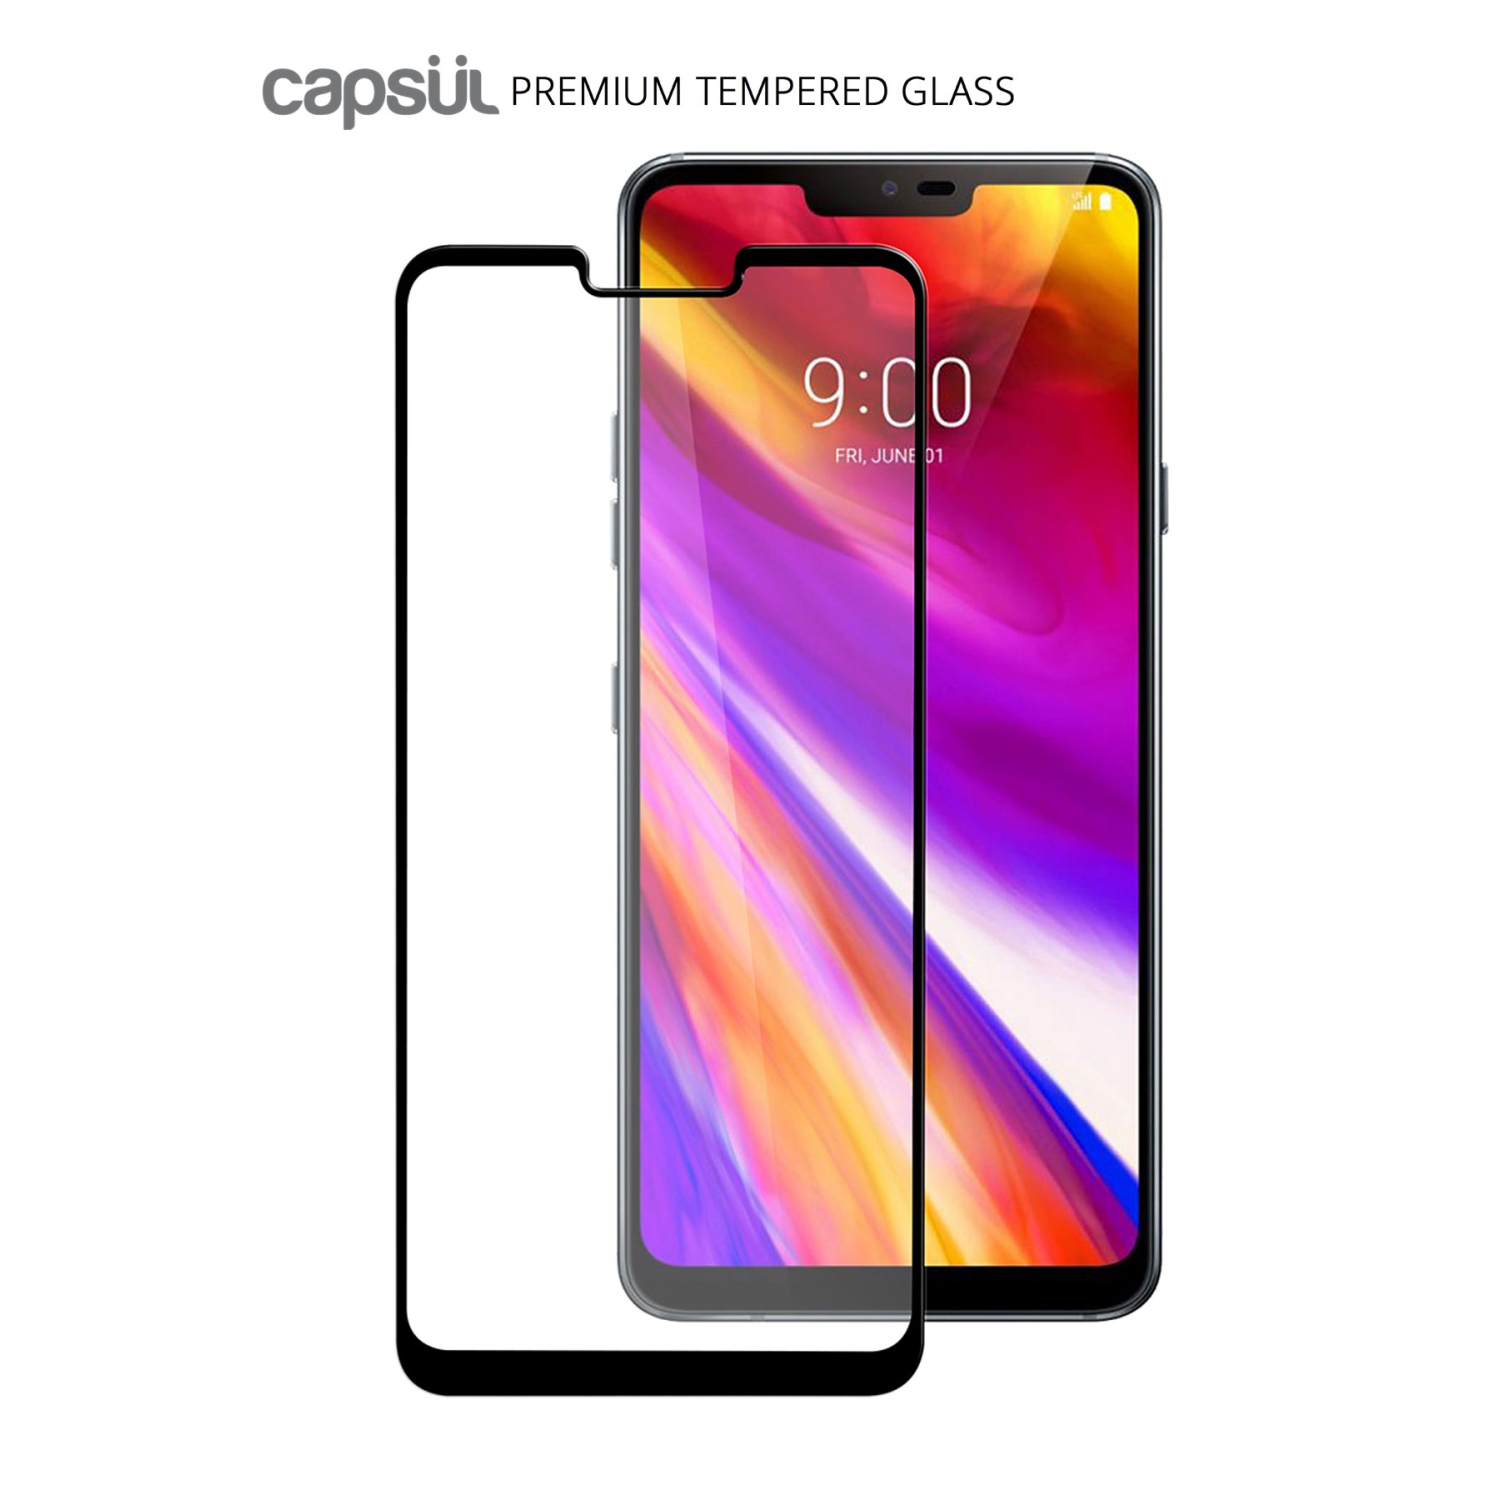 3D Capsul Tempered Glass for LG G7 ThinQ (G710) (Case Friendly)